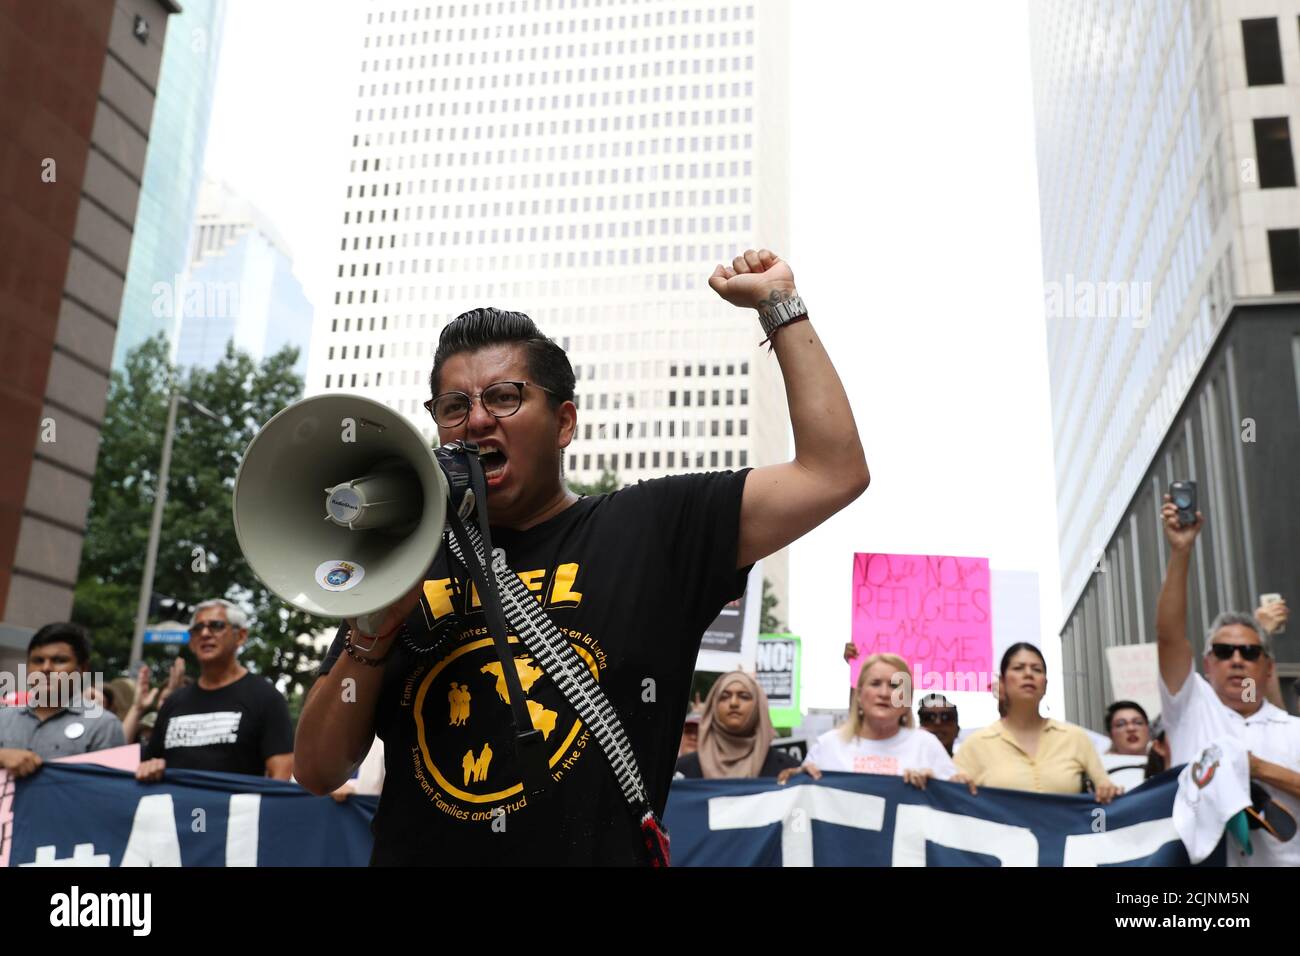 Cesar Espinosa, a leader in local activism, leads demonstrators protesting the Trump administration's immigration policies as part of a 'Families Belong Together' rally in Houston, Texas, U.S., June 30, 2018.  REUTERS/Loren Elliott Stock Photo